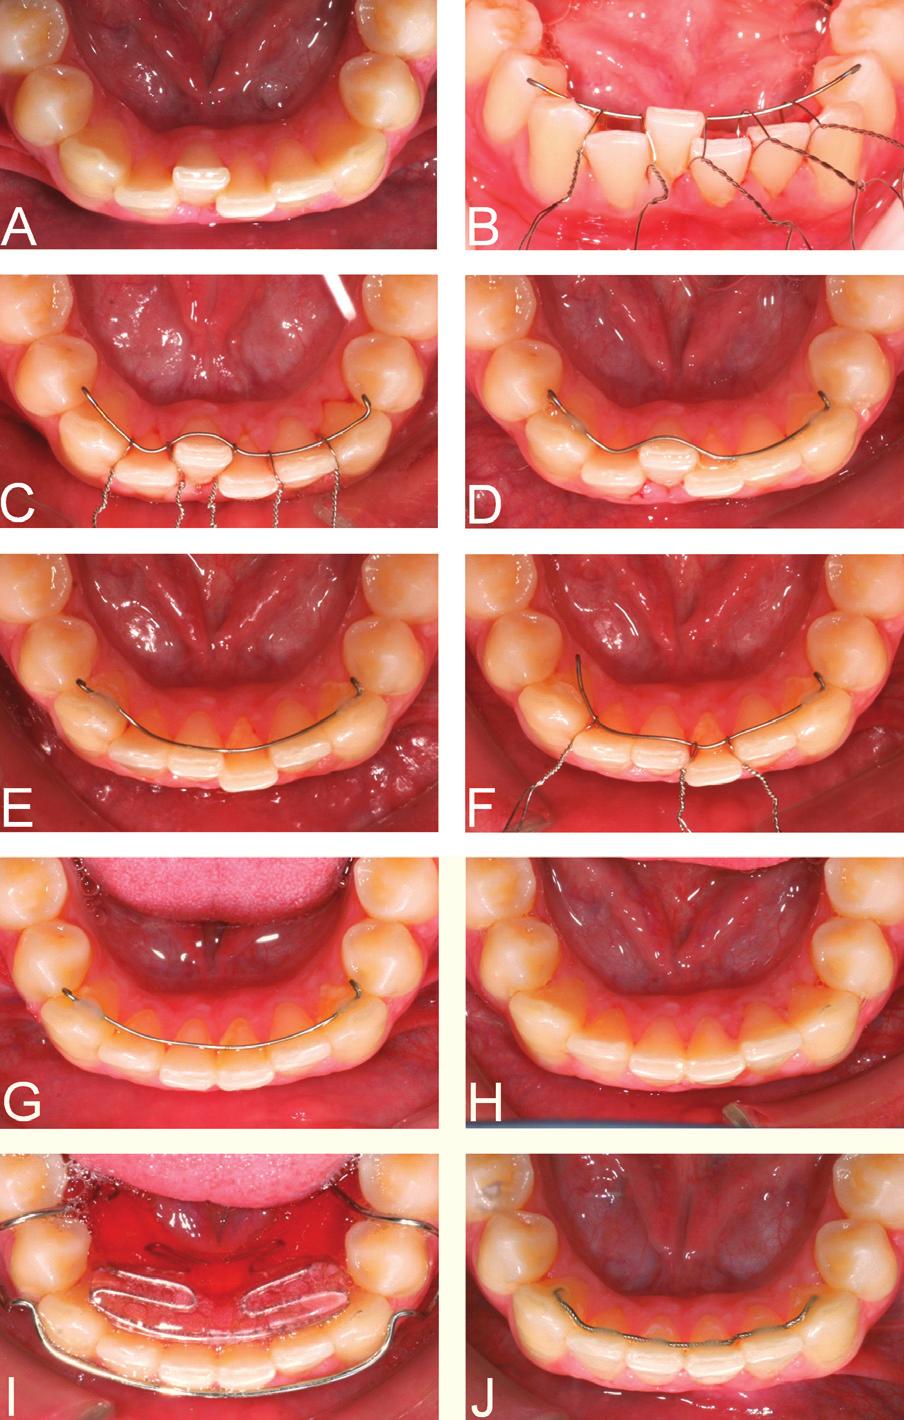 in specific simple cases when there is no opportunity or need for conventional lingual or labial orthodontic treatment.